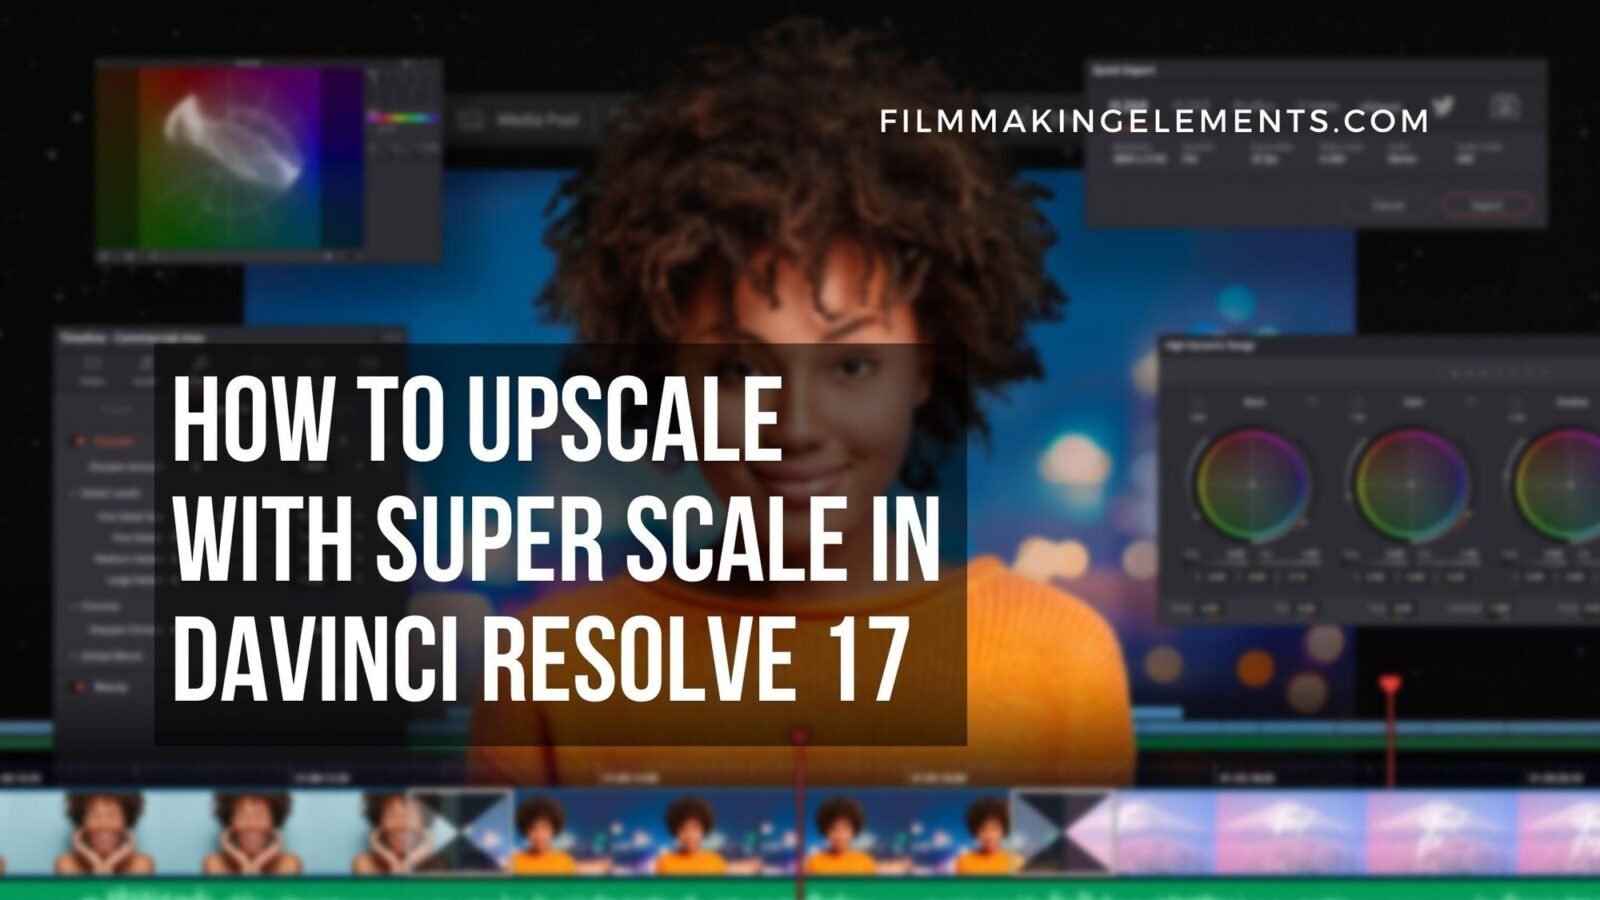 How To Upscale with Super Scale in Davinci Resolve 17